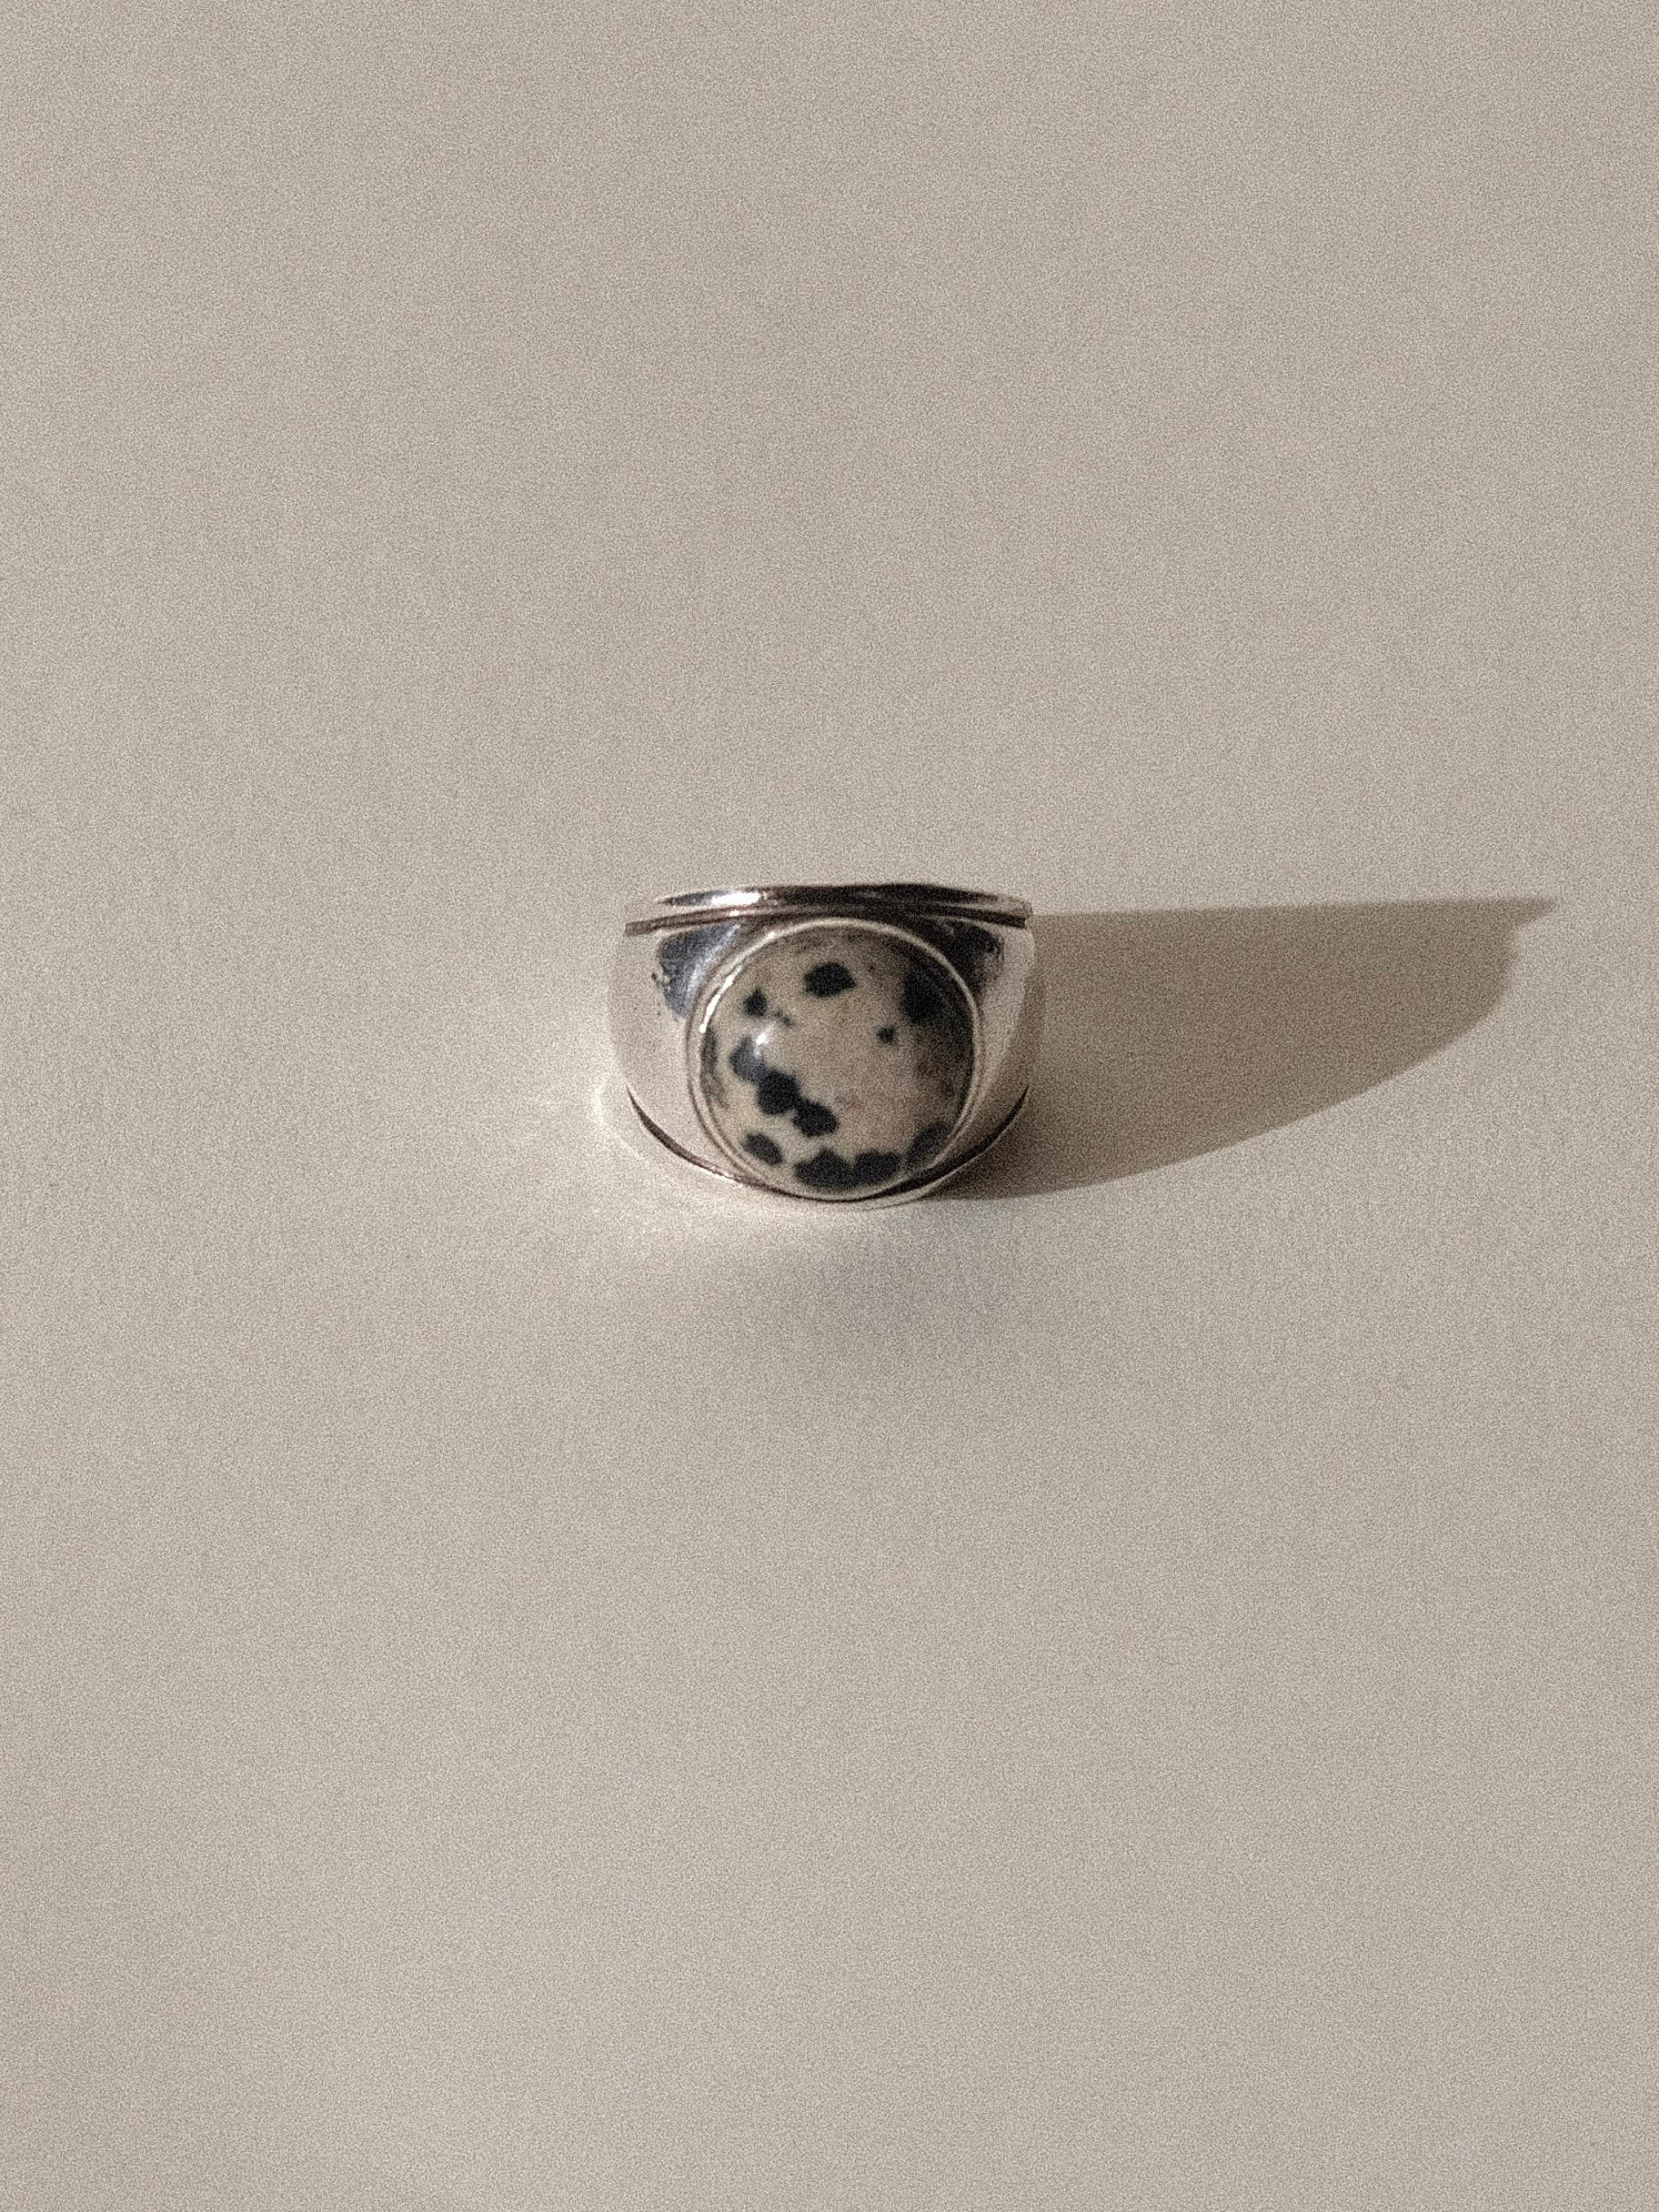 1980's or 1990's Lalique Sterling Silver Band with Dalmatian Jasper Dome
Signed Lalique
Size 6.5
Weighing 9.1 grams
Dalmatian Jasper is actually Dalmatian Stone, a form of quartz rock with a playful black and neutral spotted color pattern

Condition